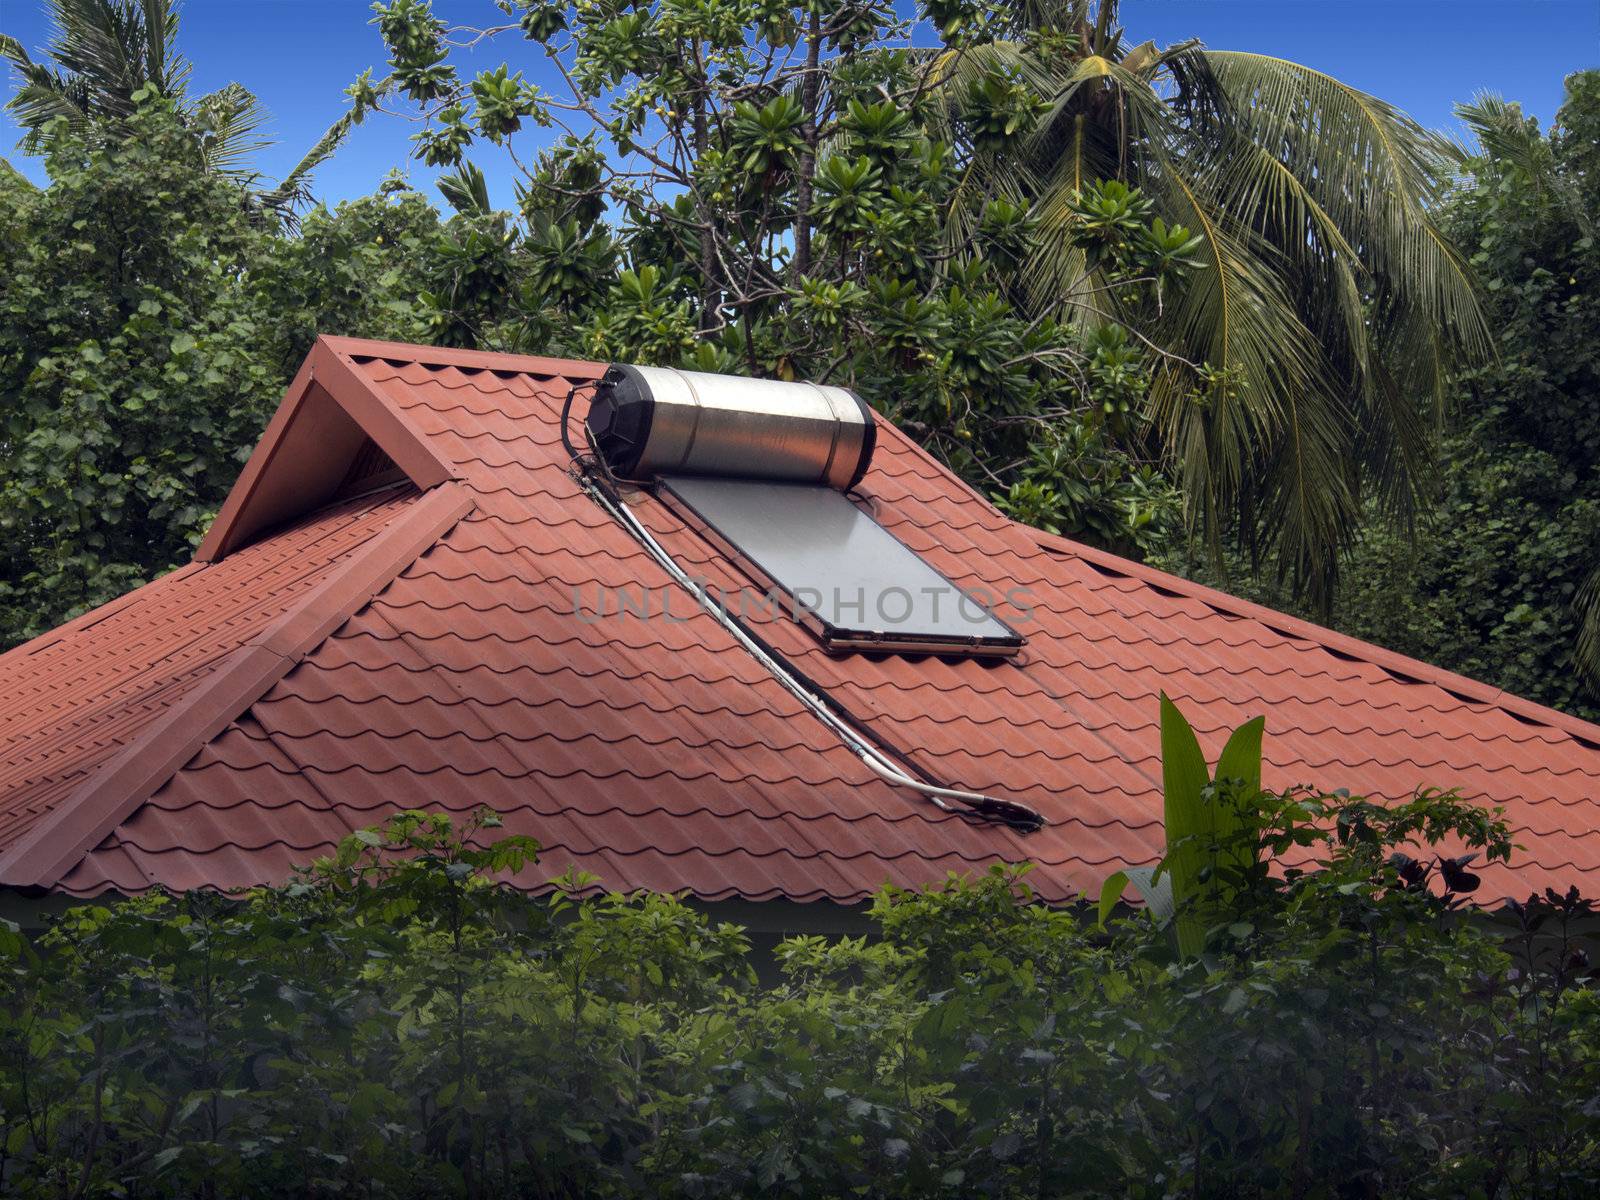 Solar water heater by f/2sumicron